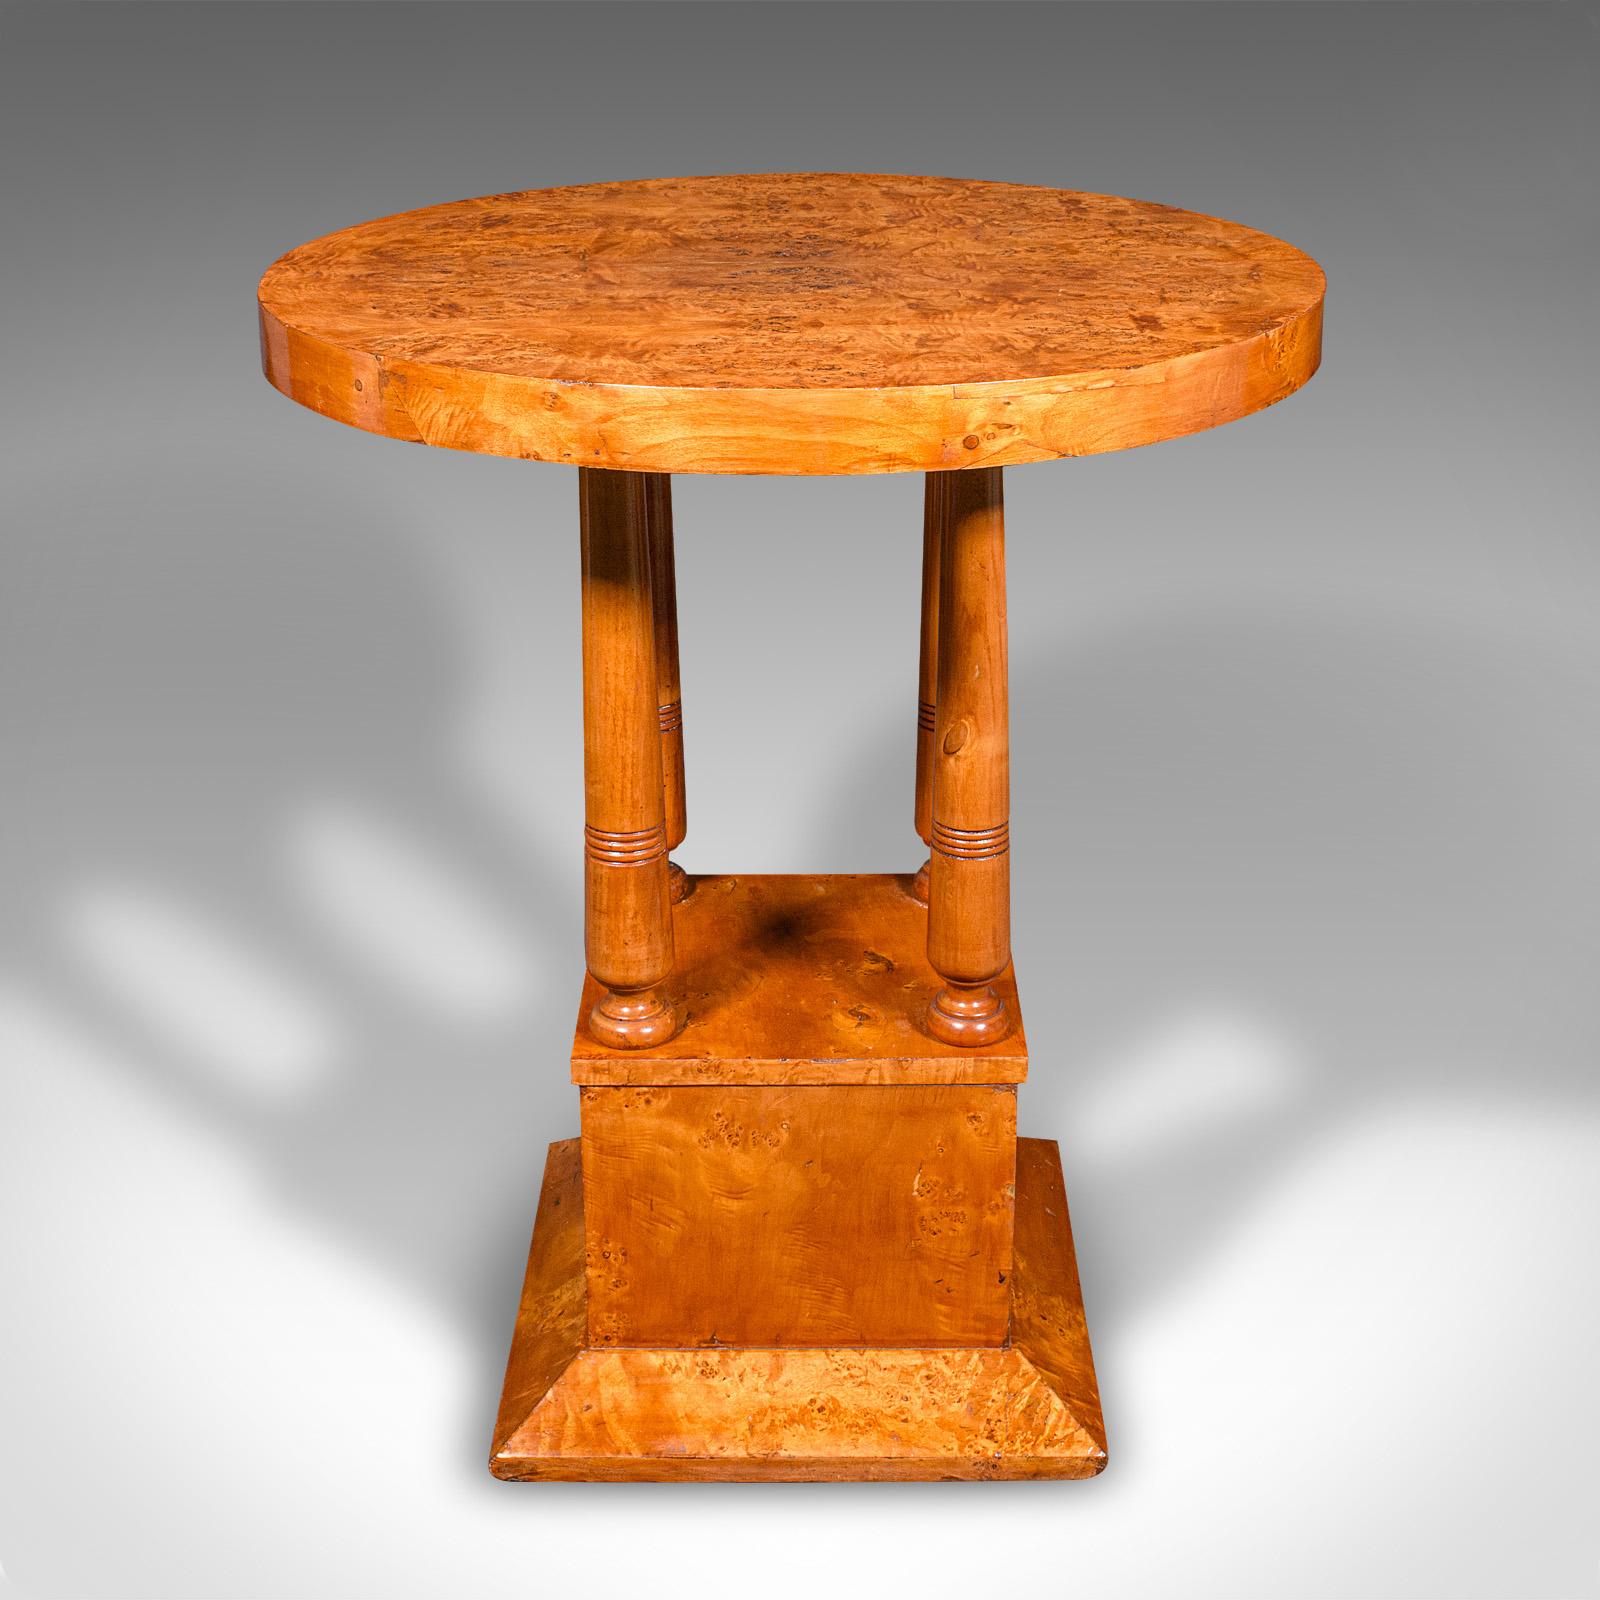 Vintage Podium Hall Table, French, Birds Eye Maple, Lamp, Side, Art Deco, C.1930 In Good Condition For Sale In Hele, Devon, GB